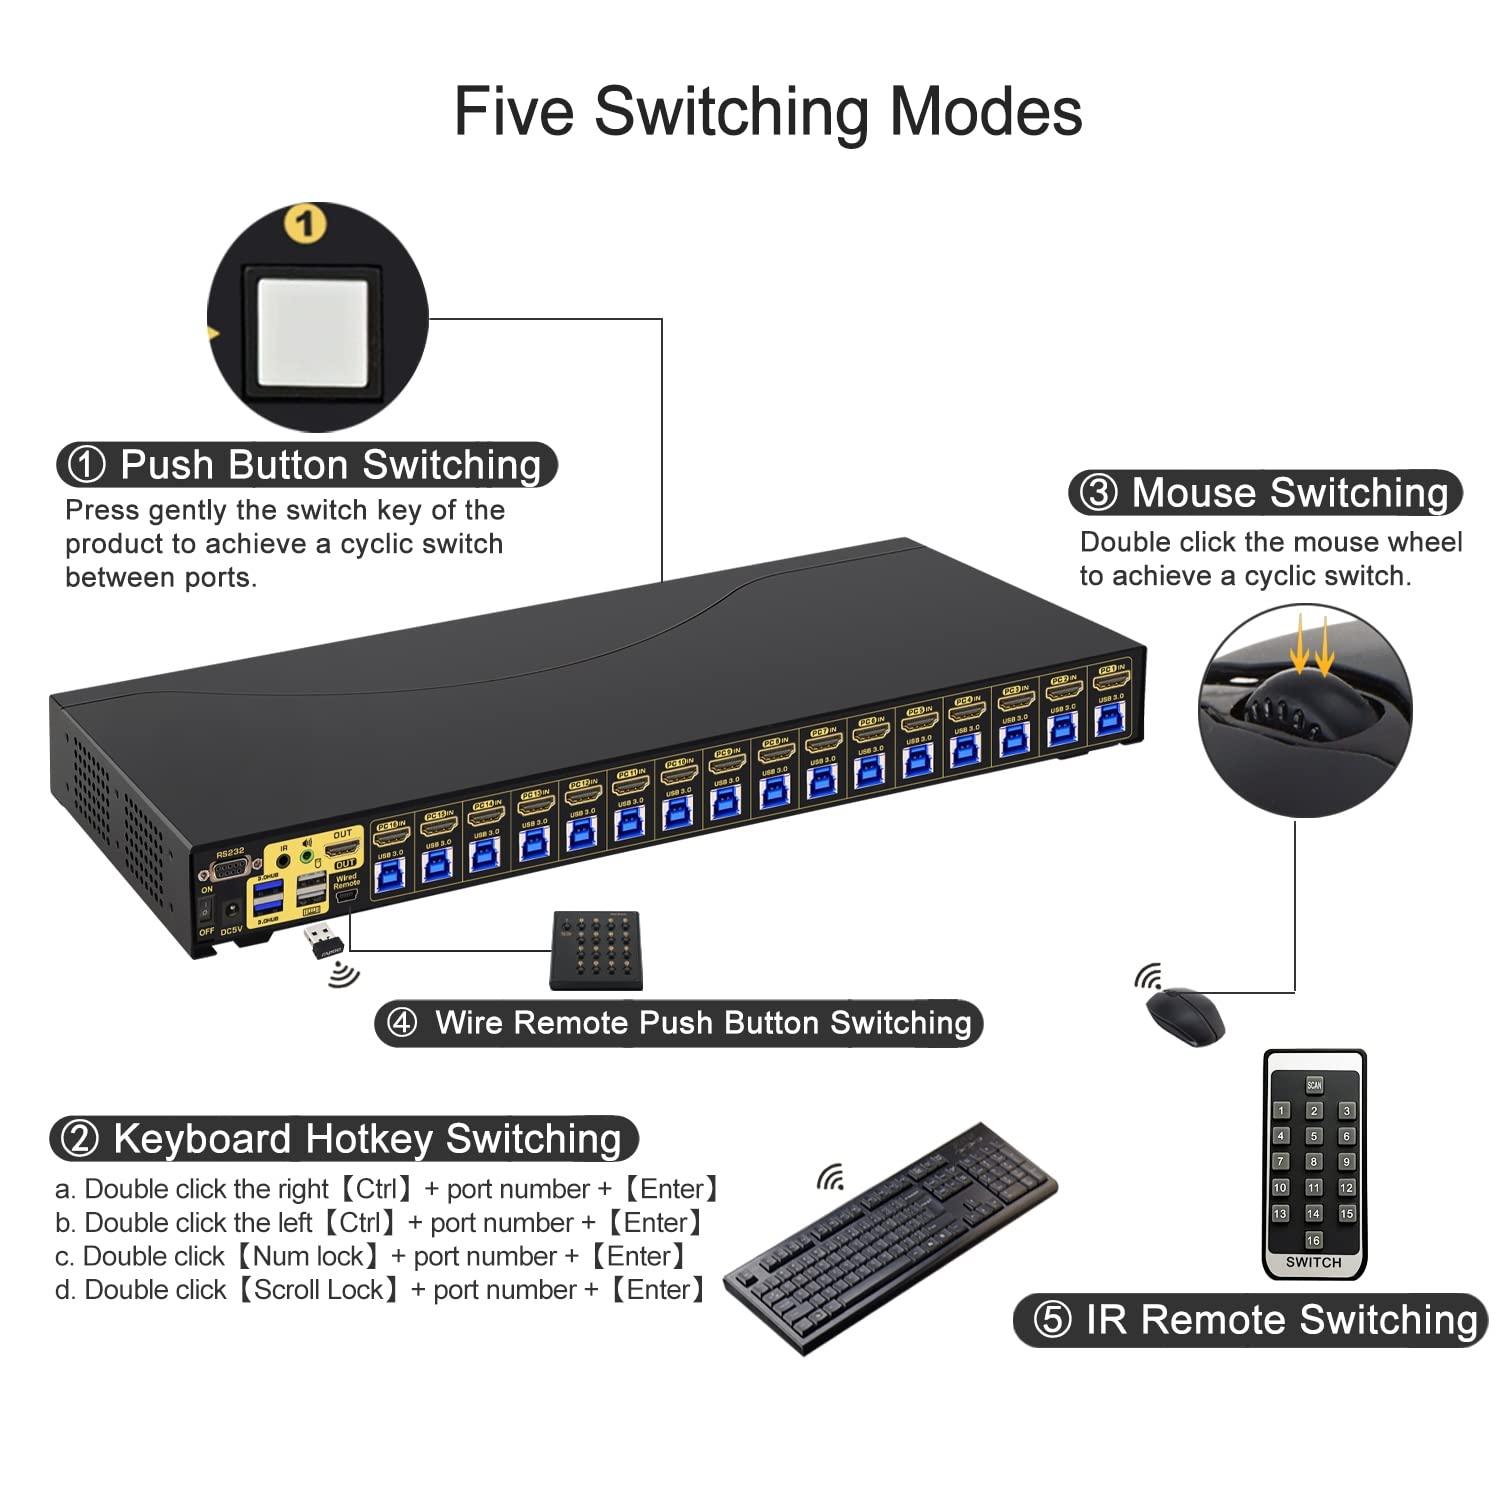 CKL 16 Port Rack Mount USB 3.0 KVM Switch HDMI 4K@60Hz with Audio, Cables and 2 Extra USB 3.0 Hub for 16 Computers Sharing Single Monitor (CKL-9116H-3) - CKL KVM Switches